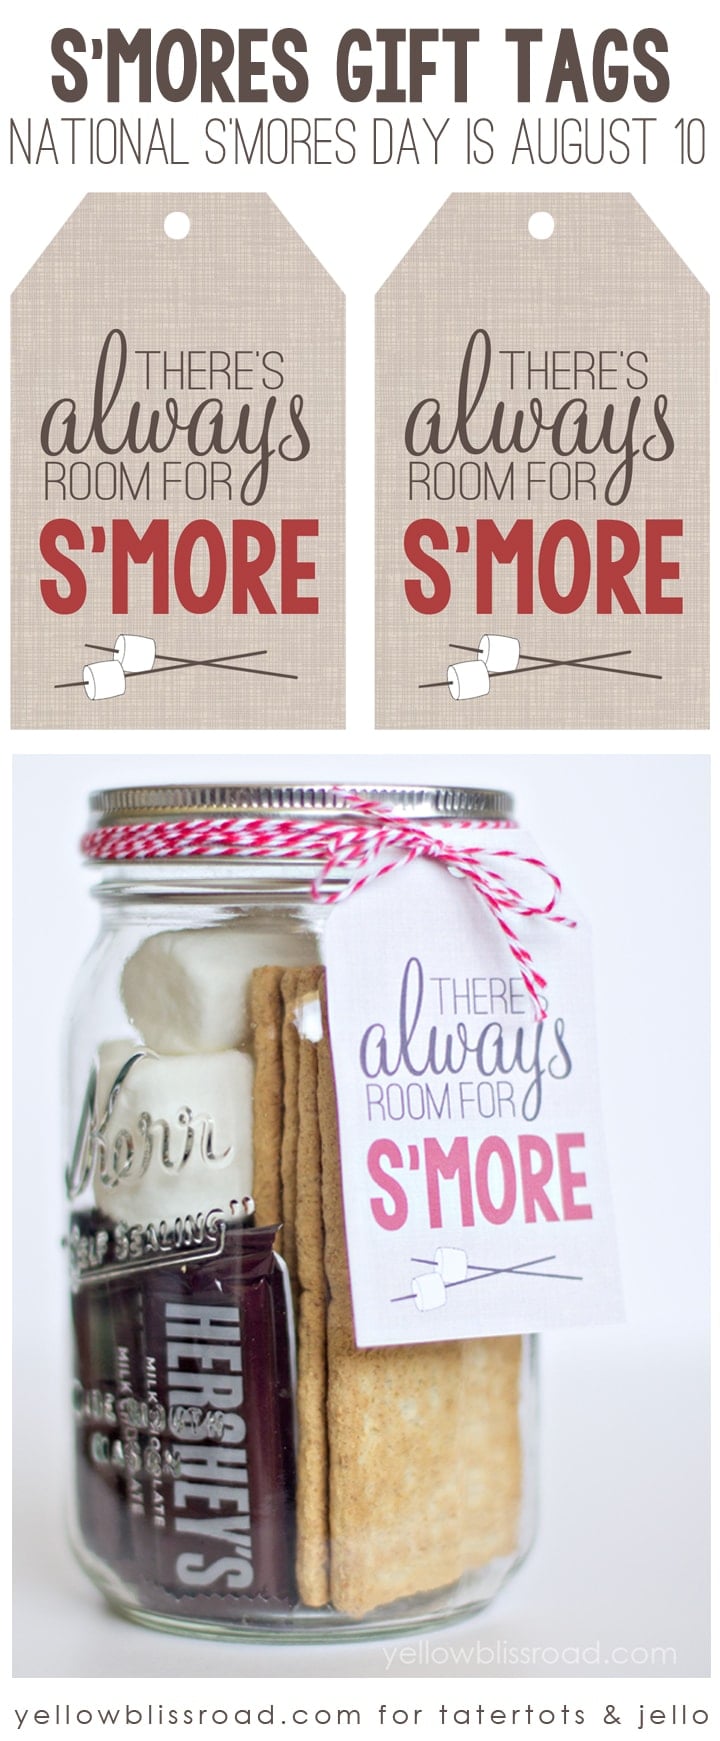 "There's Always Room for S'More" free printable graphic. Perfect for National S'Mores Day August 10!